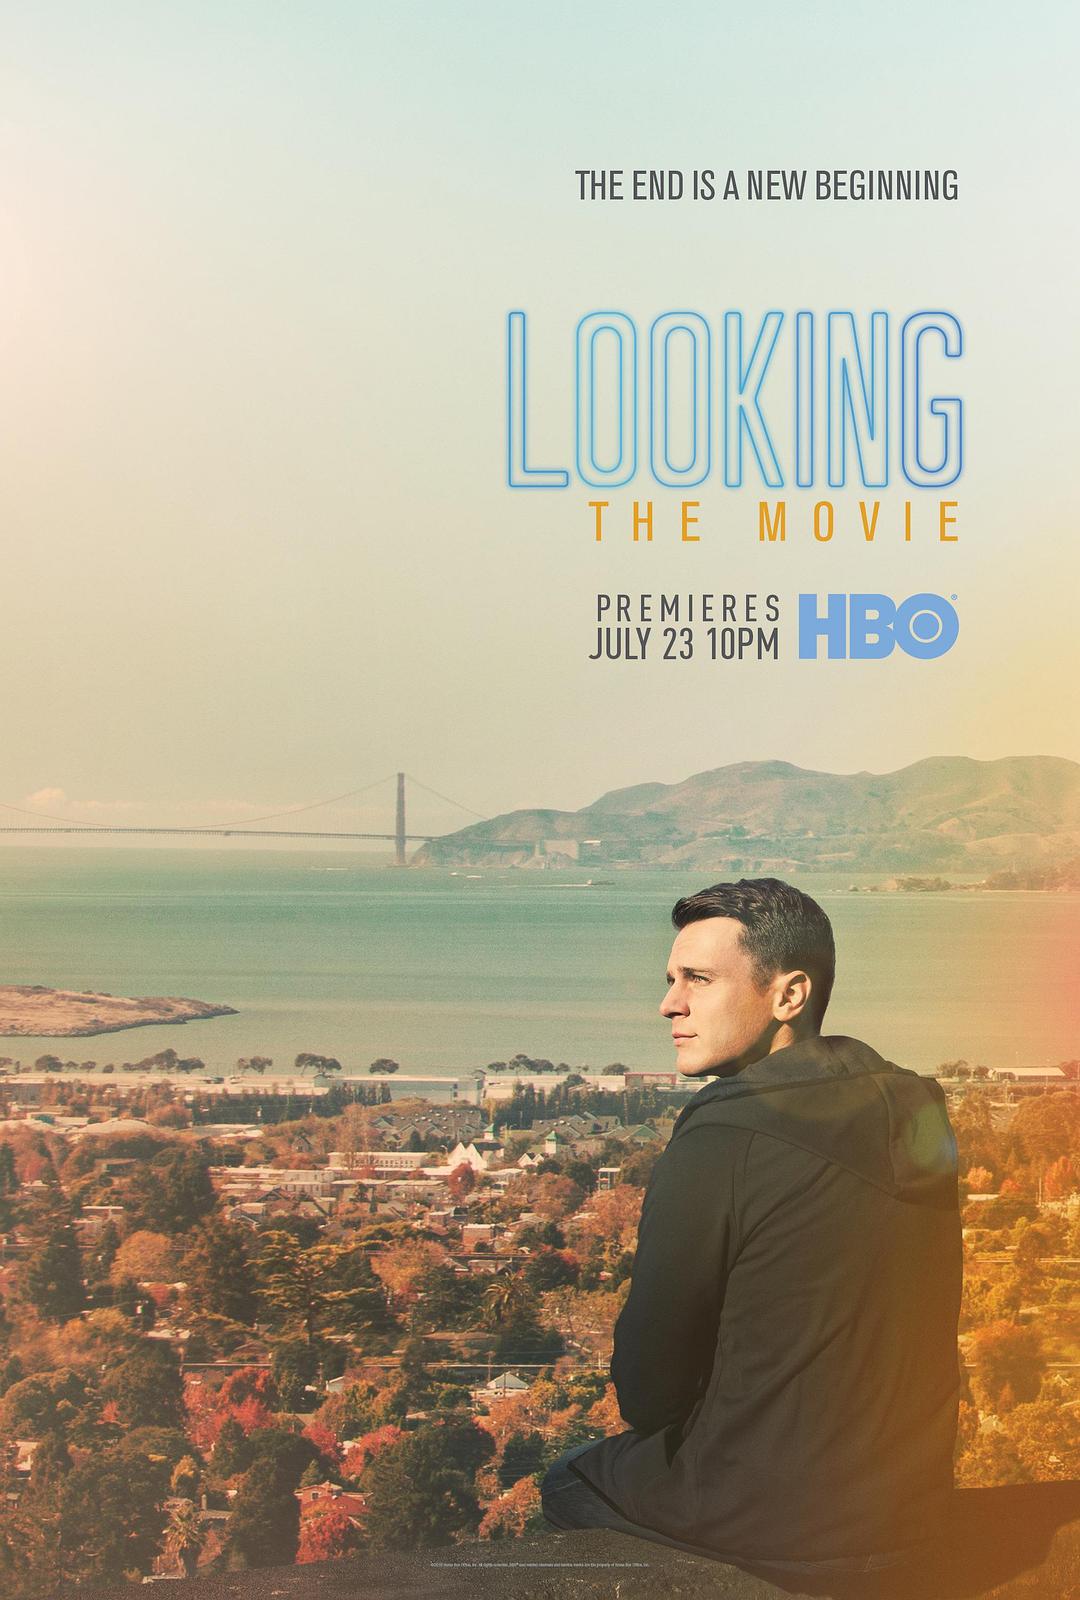 Ѱ:Ӱ Looking.The.Movie.2016.1080p.BluRay.x264-SHORTBREHD 6.63GB-1.png